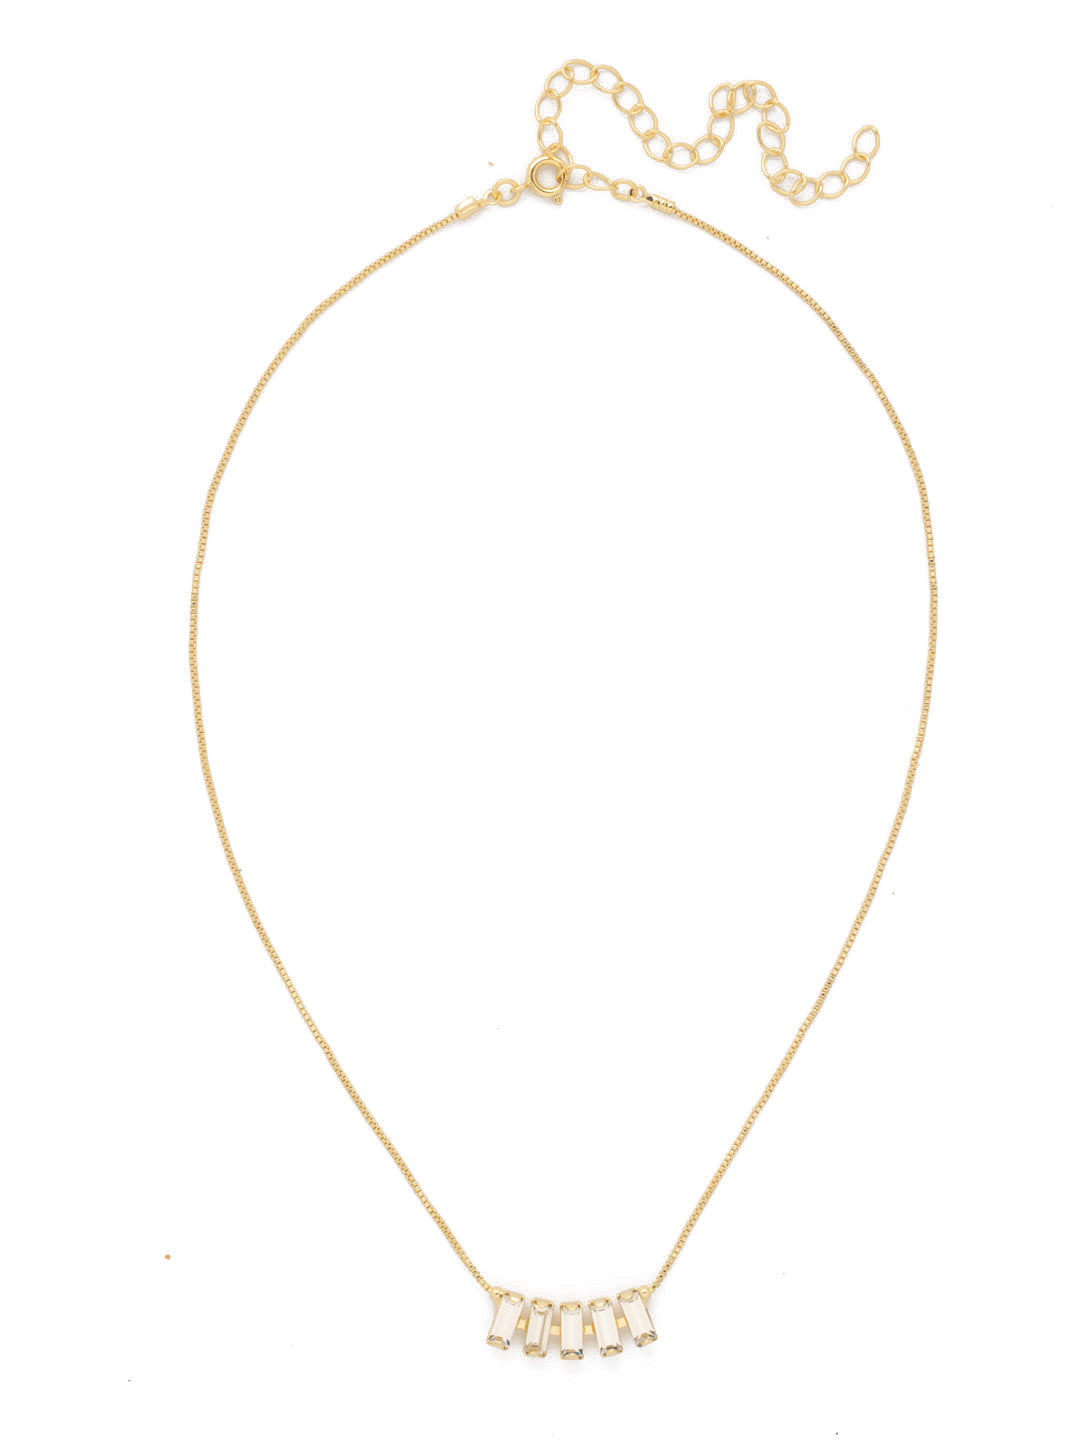 Crown Tennis Necklace - NFM31BGCRY - <p>The Crown Tennis Necklace features a row of five baguette-cut crystals on an adjustable chain, secured with a spring ring clasp. From Sorrelli's Crystal collection in our Bright Gold-tone finish.</p>